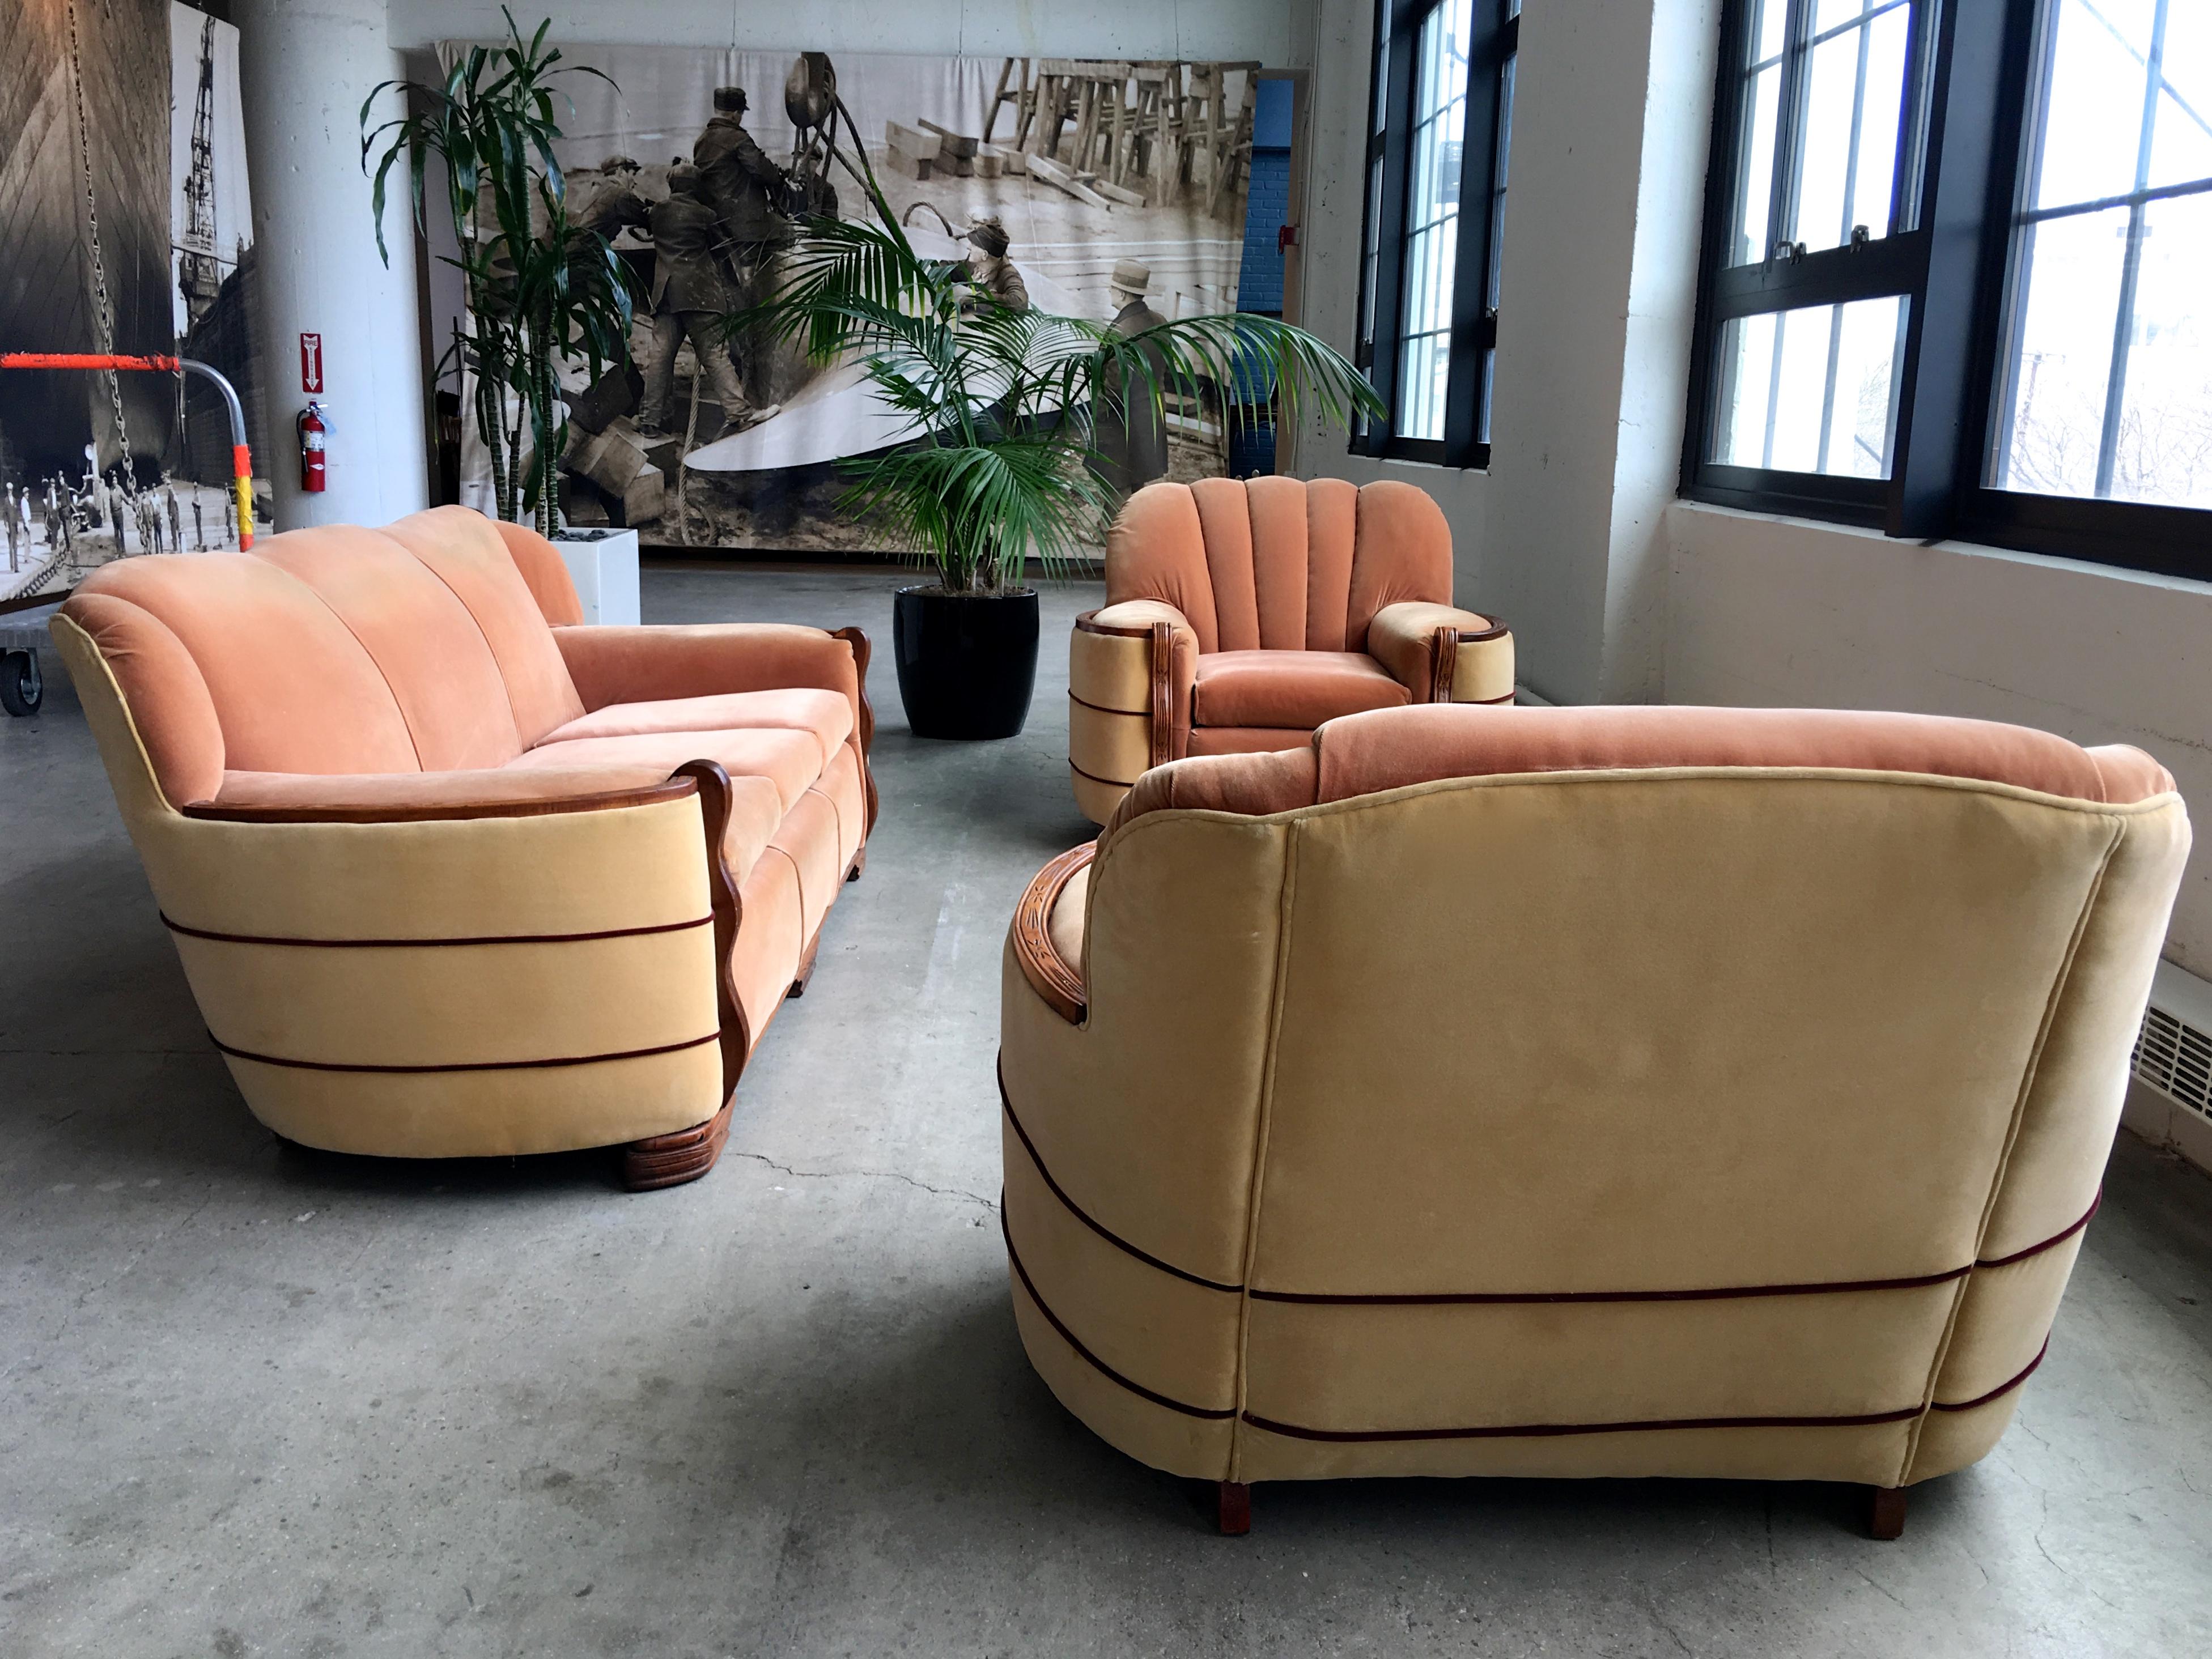 Authentic Art Deco seating suite including a 3-seat sofa and pair of club chairs upholstered in two-tone apricot and beige/peach mohair. Top and front of arms are trimmed in carved walnut, the vertical fronts having undulating wave-like form, a